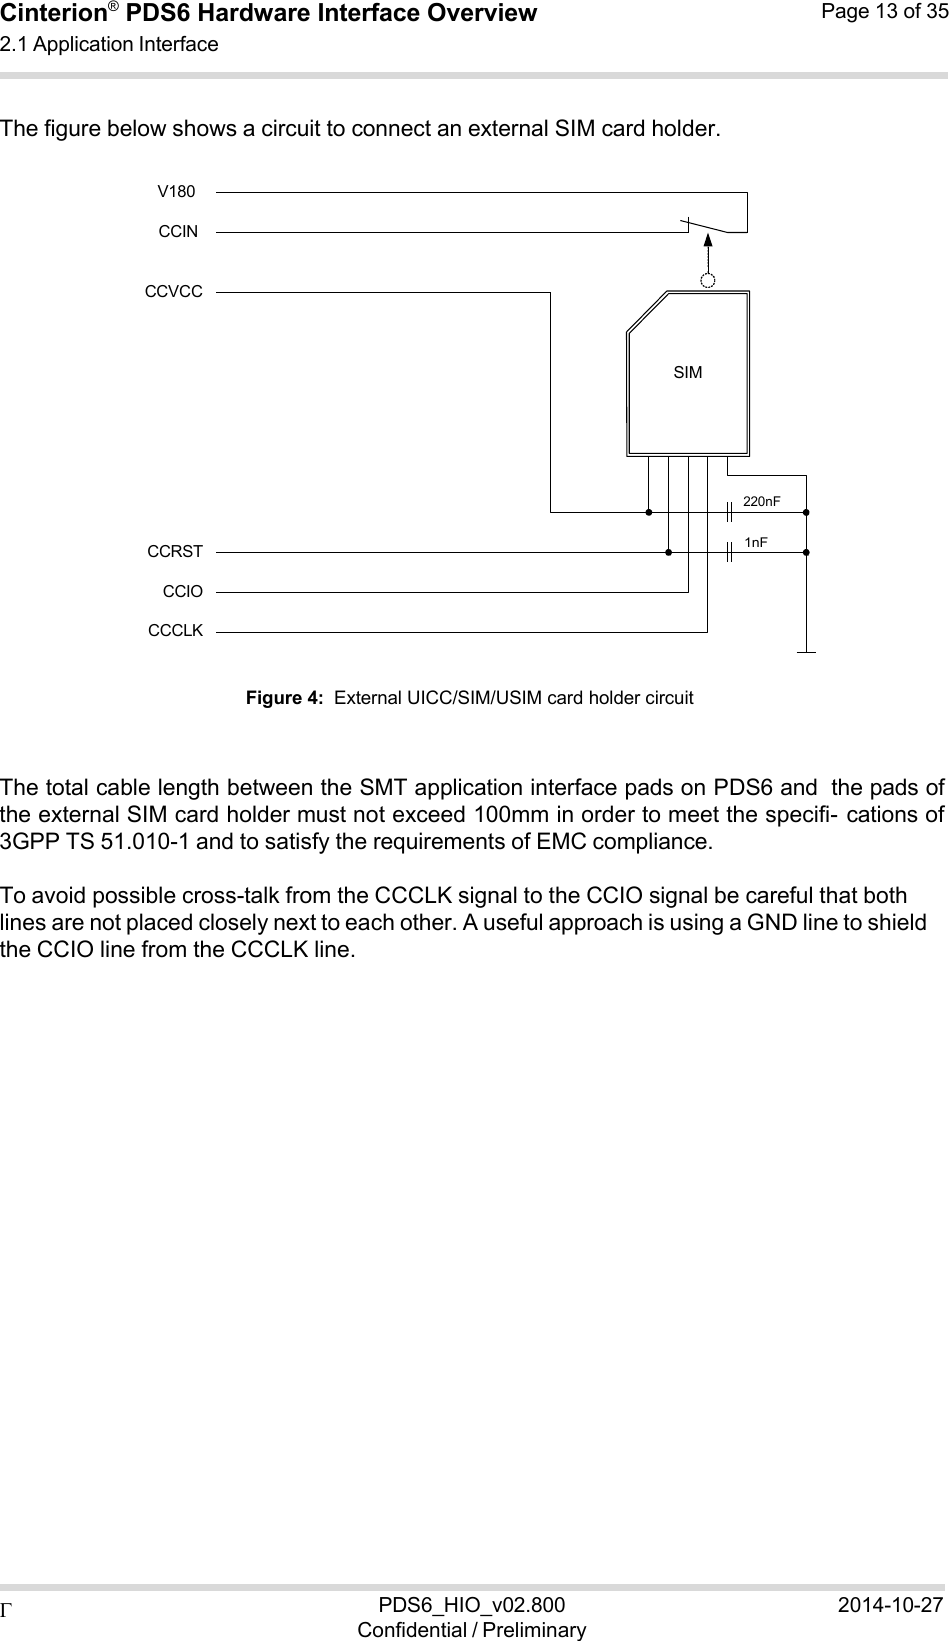  PDS6_HIO_v02.800Confidential / Preliminary2014-10-27Cinterion®  PDS6 Hardware Interface Overview 2.1 Application Interface Page 13 of 35   1nF SIM220nF  The figure below shows a circuit to connect an external SIM card holder.  V180  CCIN  CCVCC             CCRST CCIO CCCLK  Figure 4:  External UICC/SIM/USIM card holder circuit    The total cable length between the SMT application interface pads on PDS6 and the pads of the external SIM card holder must not exceed 100mm in order to meet the specifi- cations of 3GPP TS 51.010-1 and to satisfy the requirements of EMC compliance.  To avoid possible cross-talk from the CCCLK signal to the CCIO signal be careful that both lines are not placed closely next to each other. A useful approach is using a GND line to shield the CCIO line from the CCCLK line. 